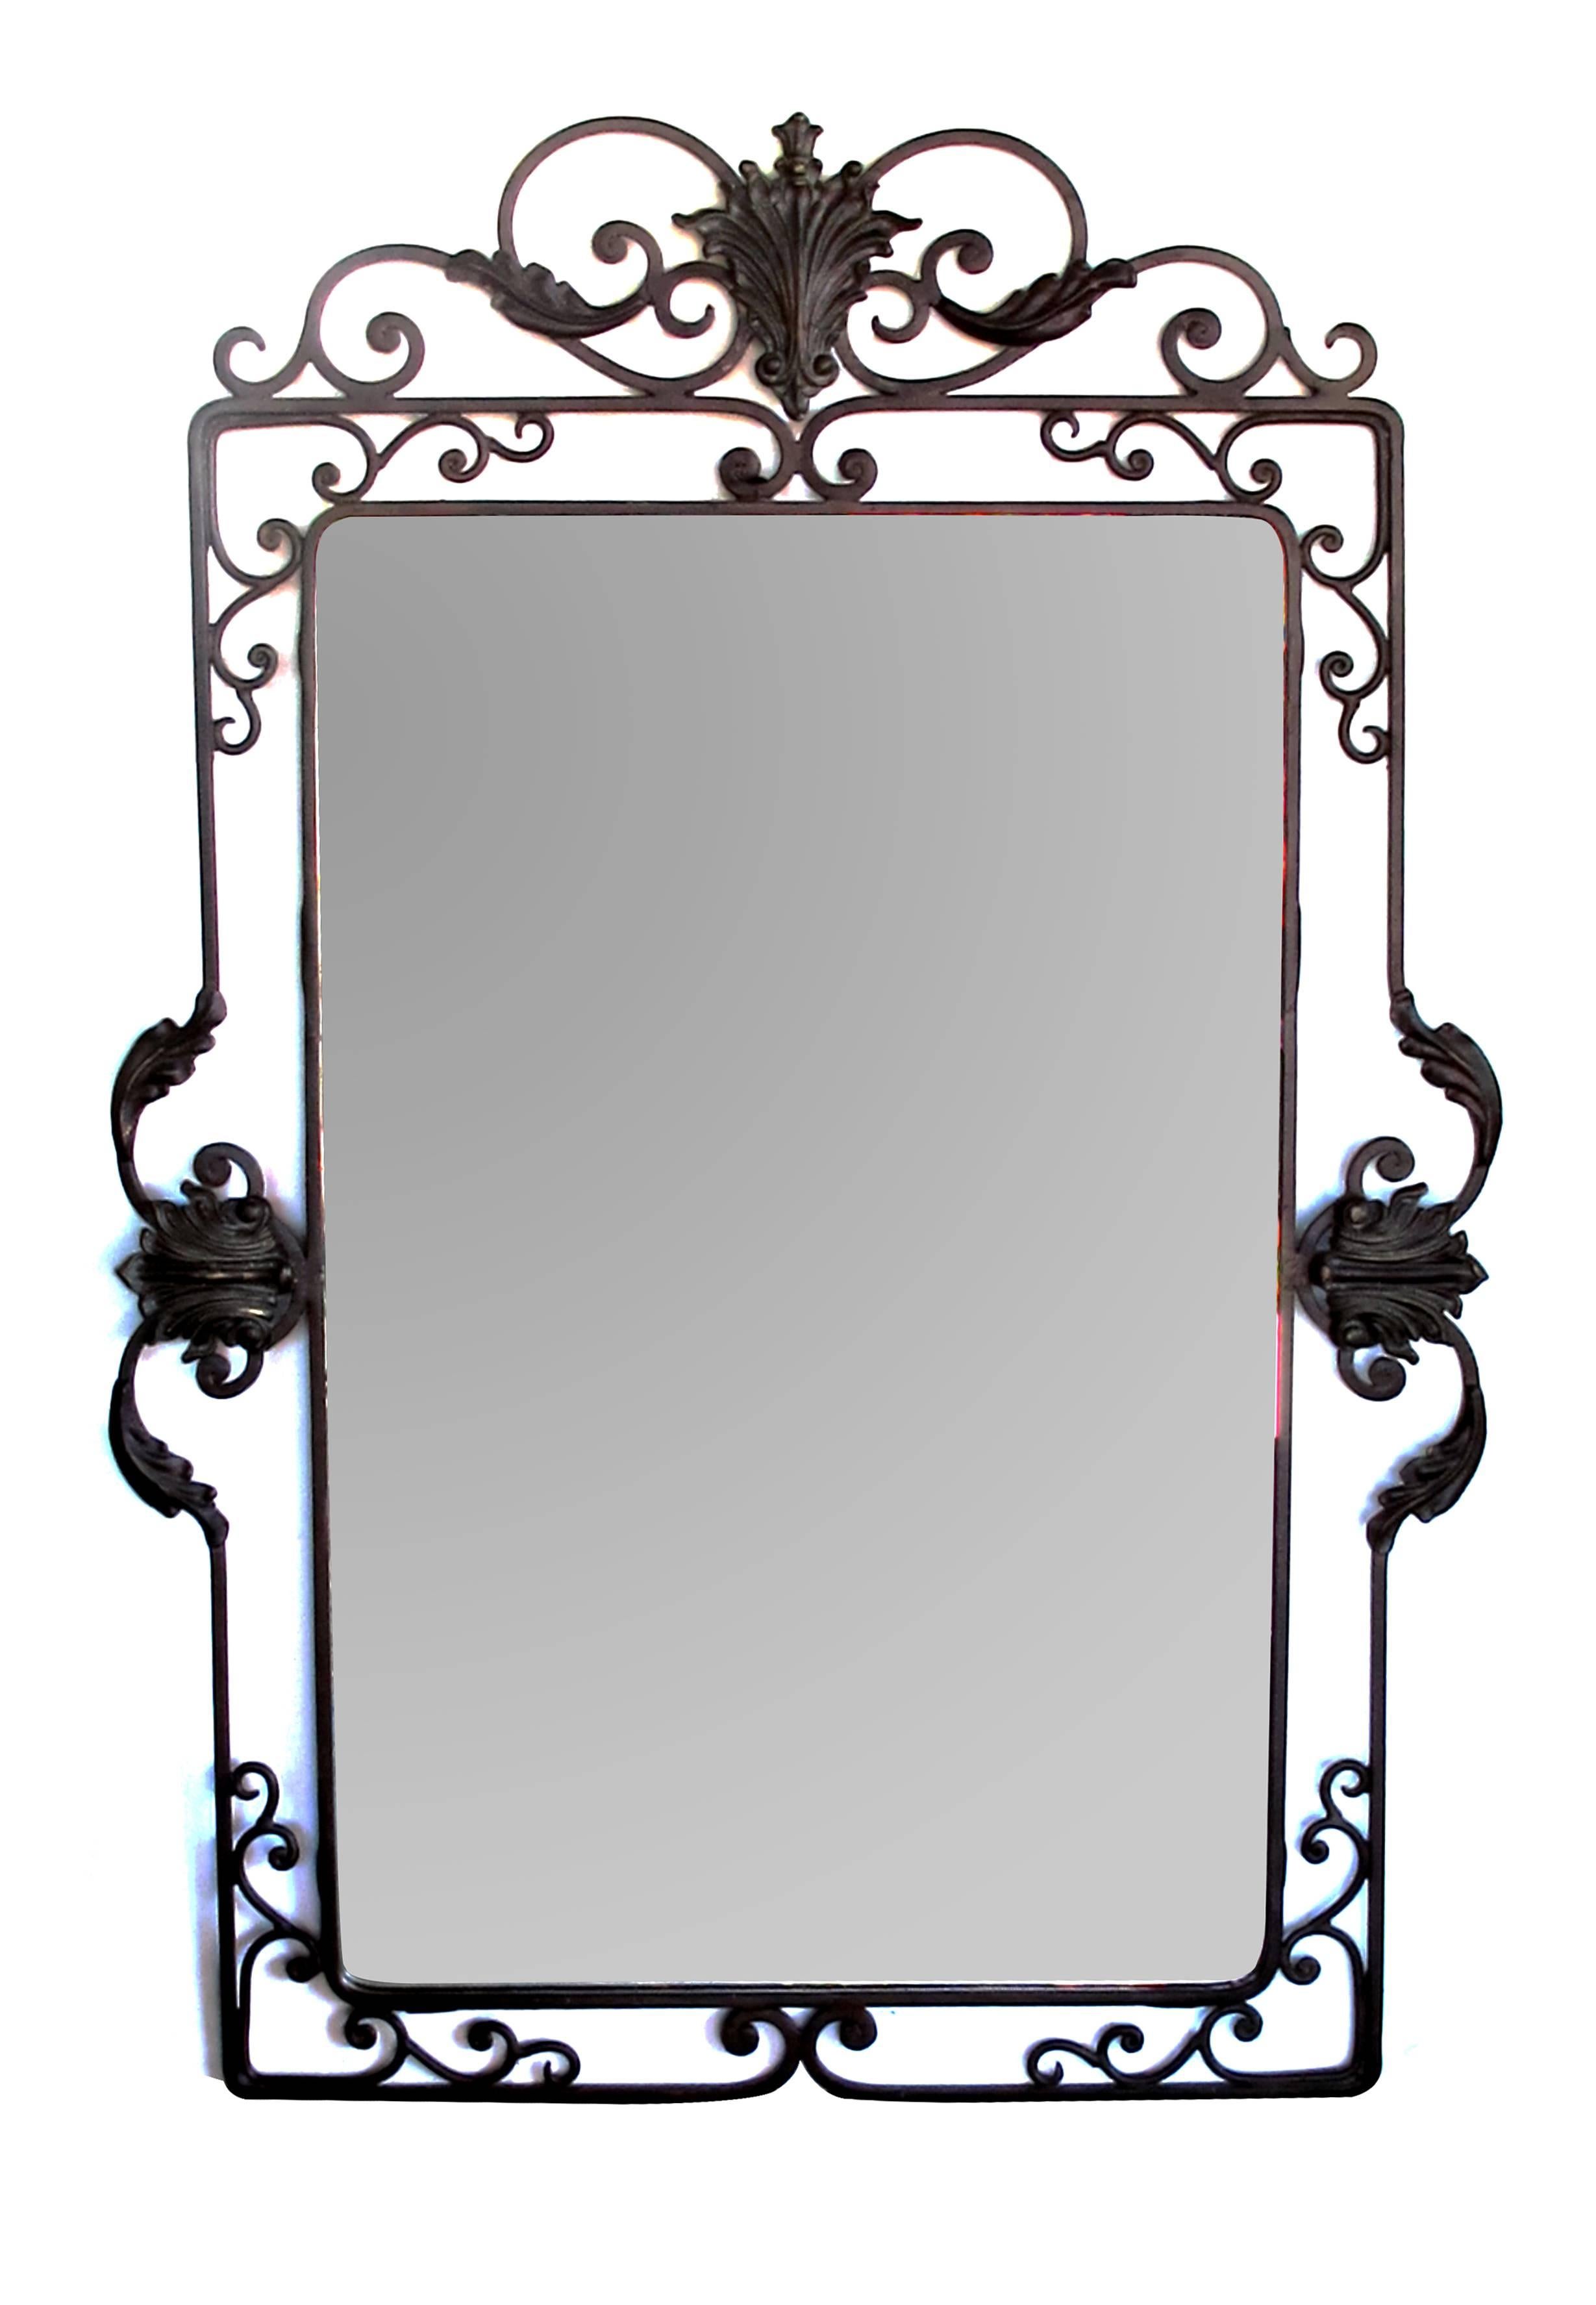 Well-Crafted French Art Deco Iron Scrollwork Mirror with Beveled Plate